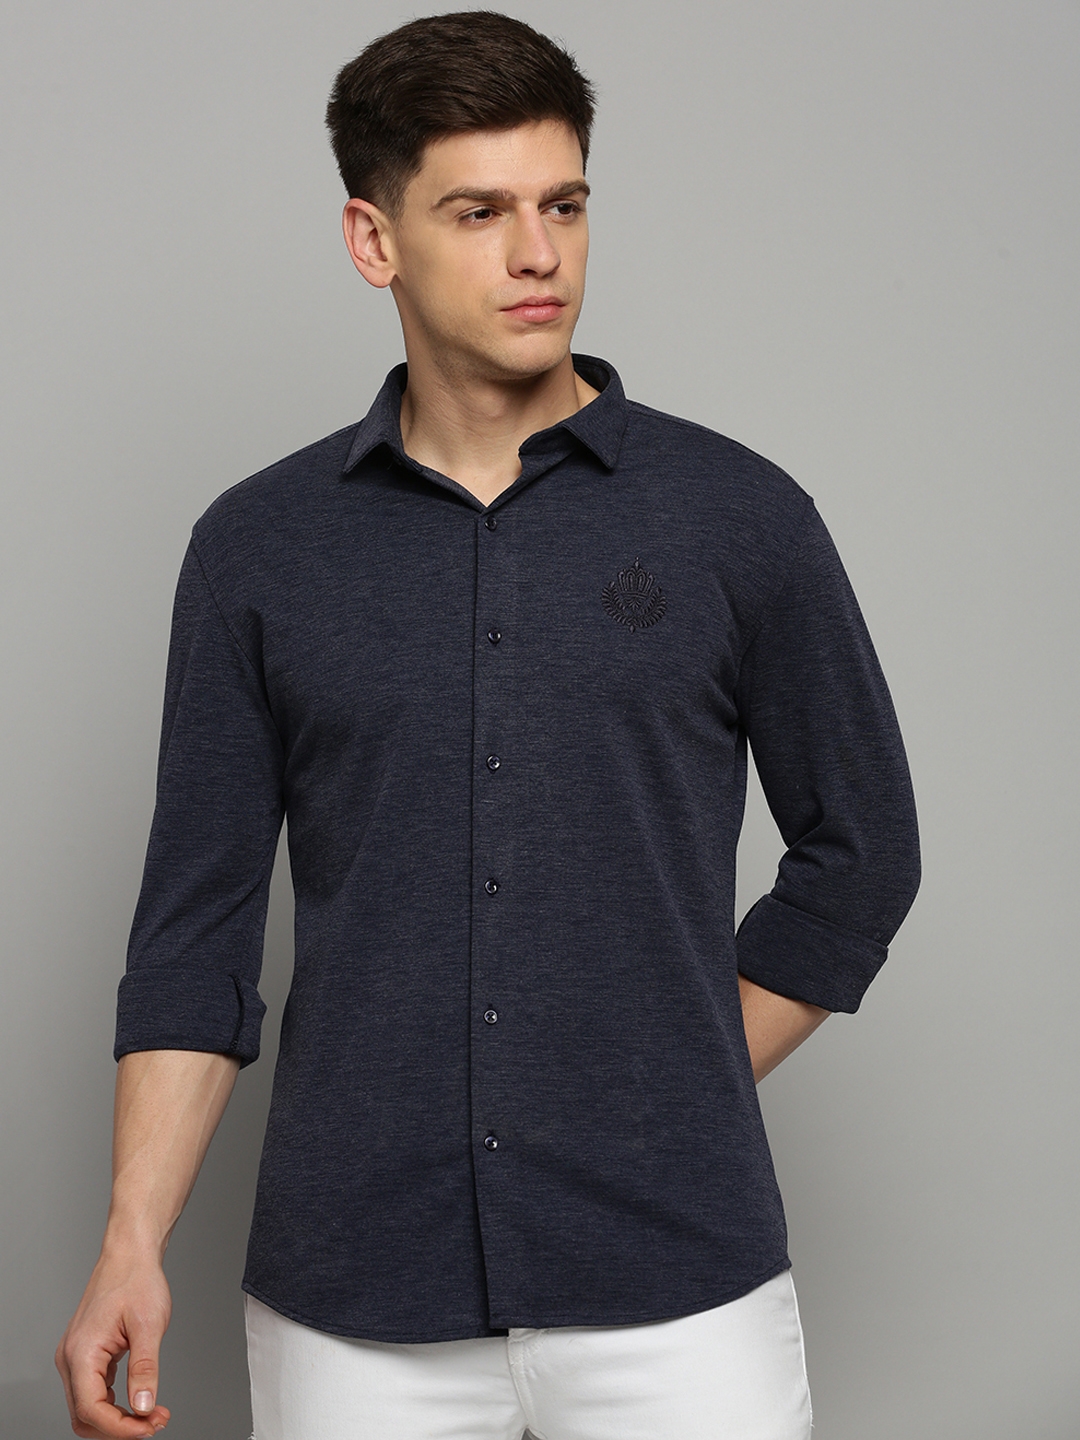 Showoff | SHOWOFF Men's Spread Collar Solid Navy Blue Classic Shirt 1